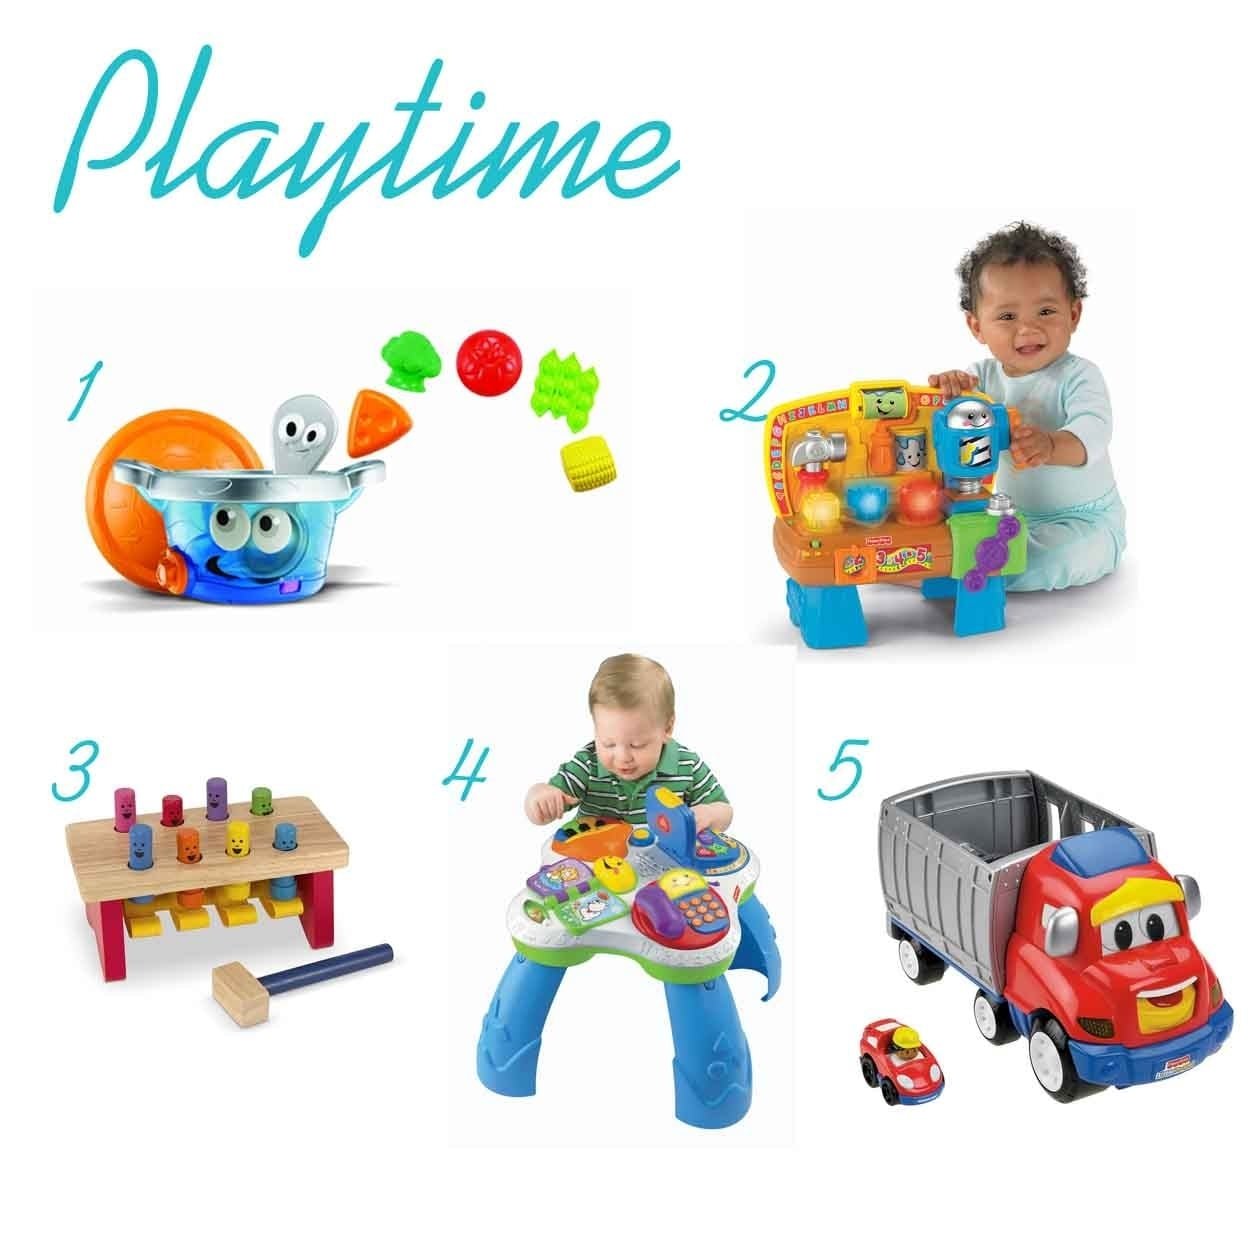 10 Most Popular Gift Ideas For 1 Year Old the ultimate gift list for a 1 year old boy e280a2 the pinning mama 7 2022